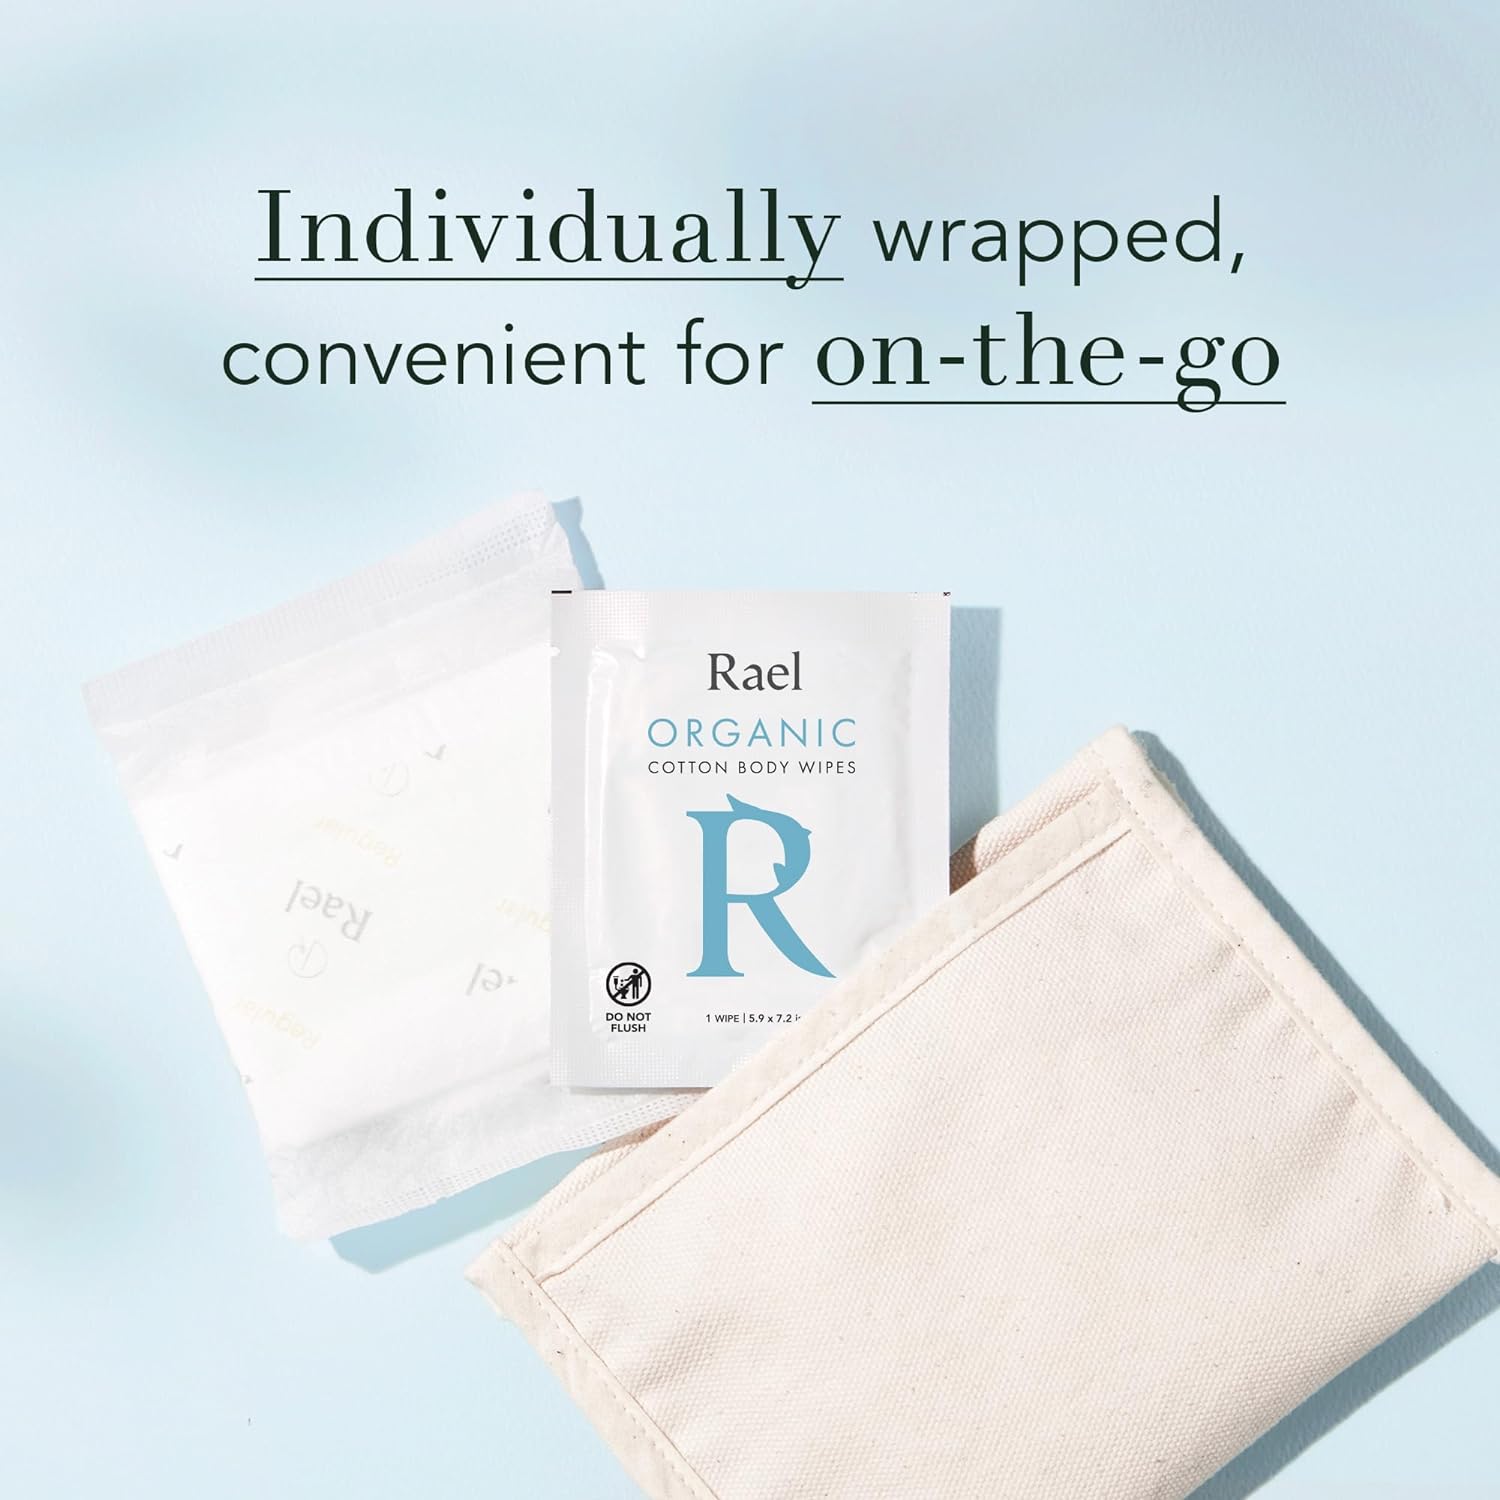 Rael Body Wipes, Organic Cotton Wipes for Women - Unscented Body Wipes, Individually Wrapped, All Skin Types, Vegan, Cruelty Free (10 Count, Pack of 4) : Health & Household